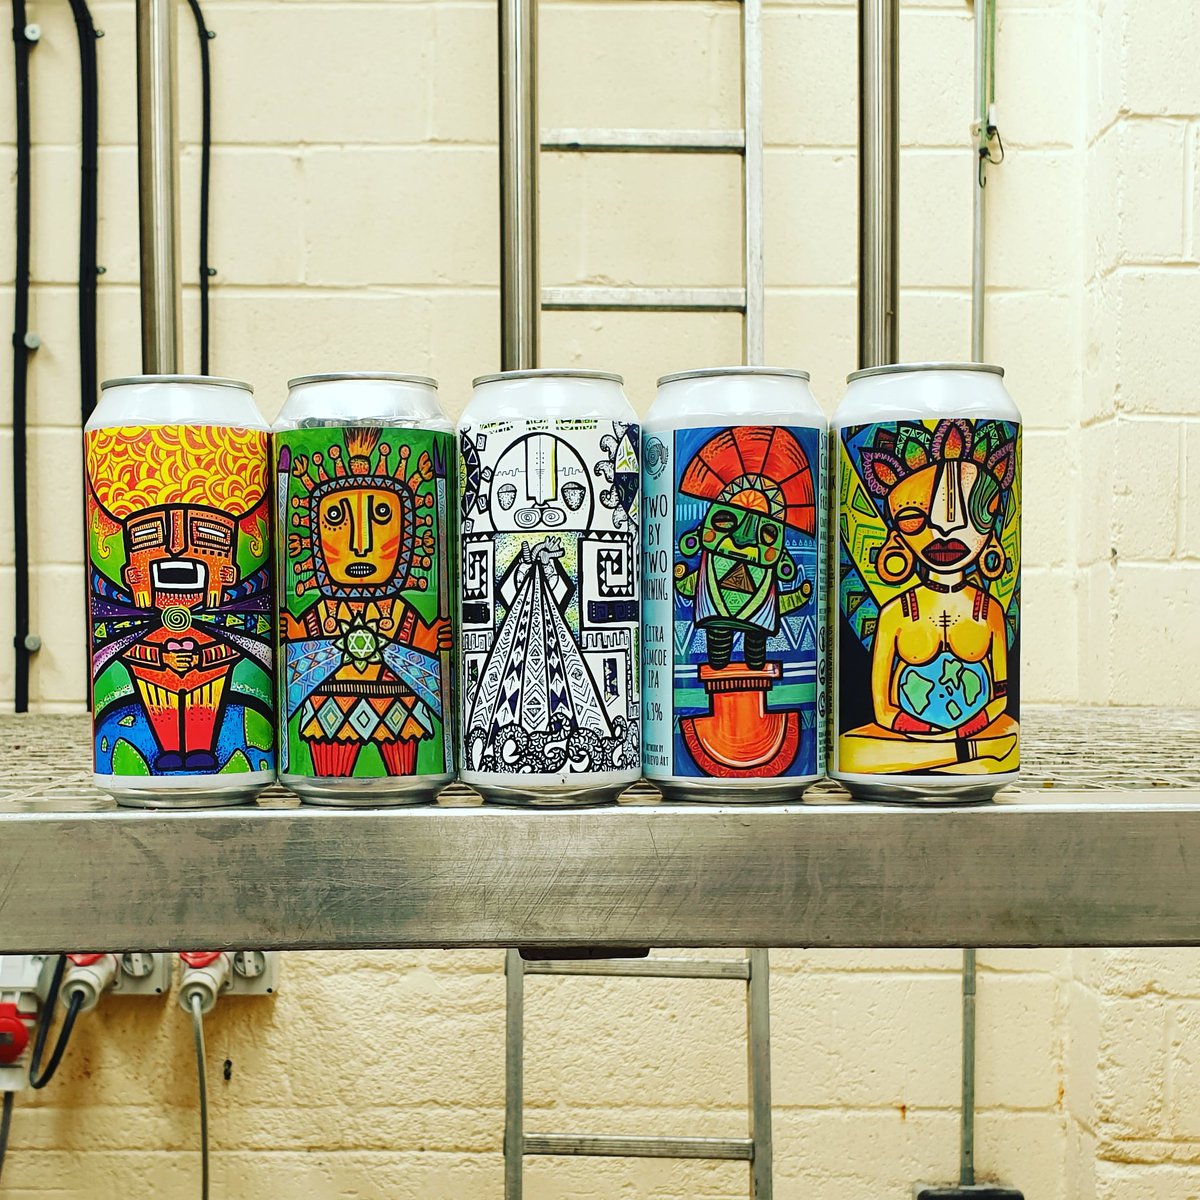 Hello everyone. We now have no more cans for sale. Thanks to everyone who'd bought them over the past few weeks, your support is massively appreciated. We will have more beer soon, watch this space!!